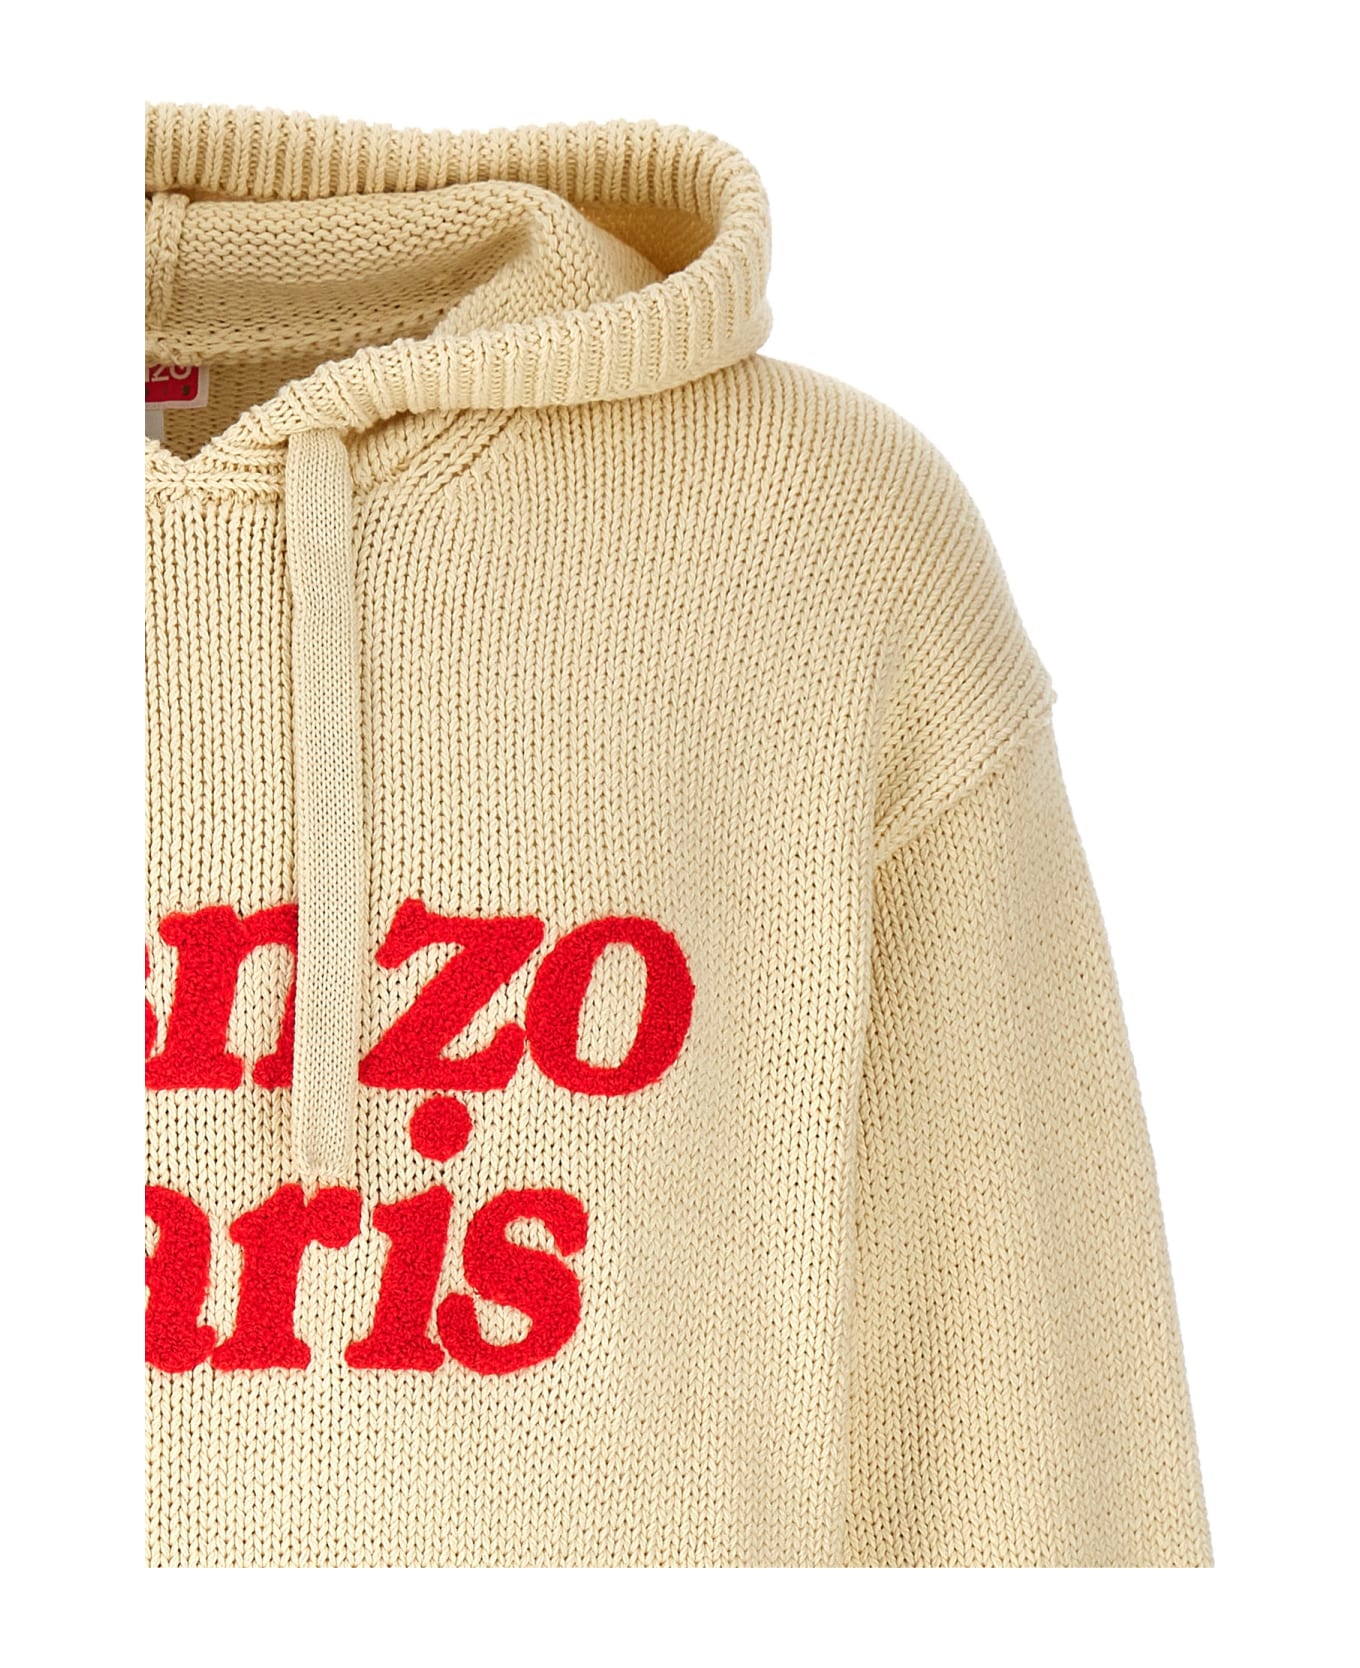 Kenzo 'kenzo By Verdy' Hooded Sweater - Off white